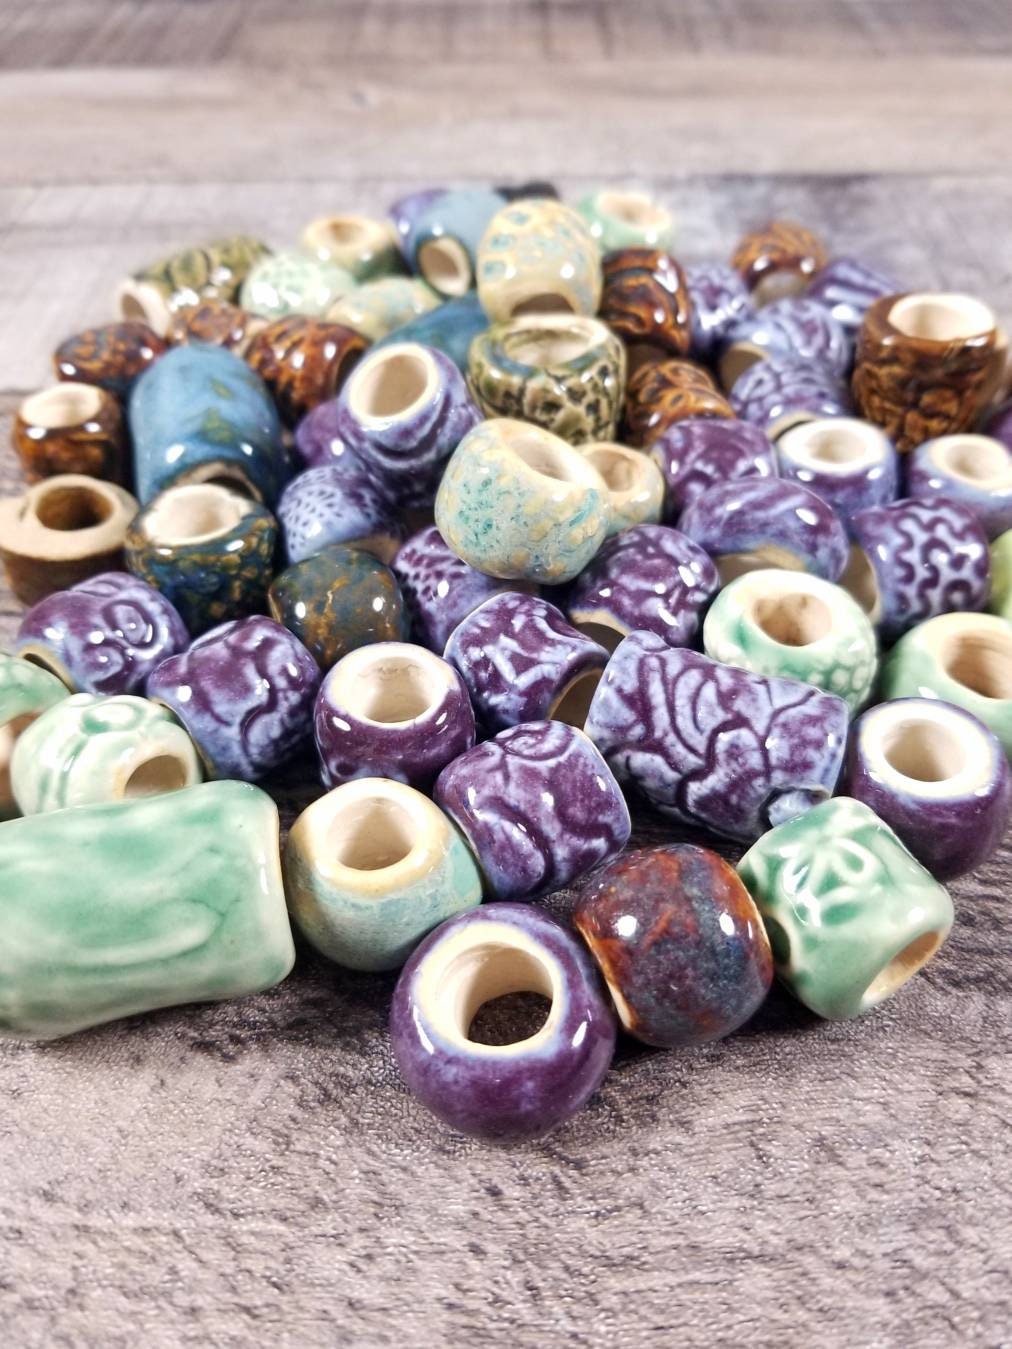  Hair Beads for Braids for Girls, Durable Large Hole Beads for  Hair Braiding, Assorted Macrame Beads for Crafts, Women Medium Loc Beads,  Colorful Natural Gemstone Pack of 20 : Arts, Crafts